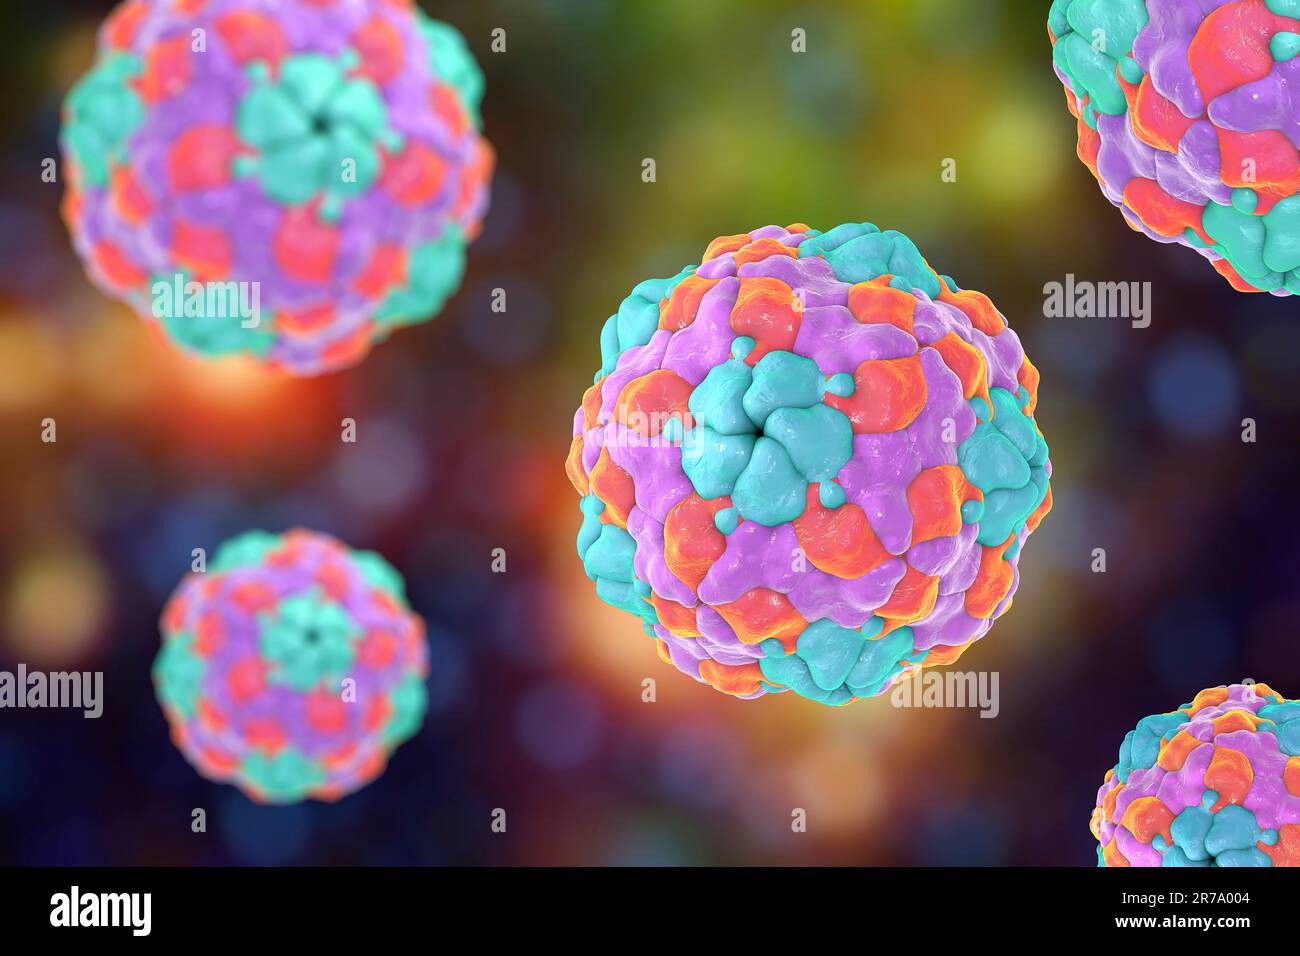 Human Parechovirus on colorful background, 3D illustration. Parechoviruses cause respiratory, gastrointestinal infections, are associated with brain d Stock Photo